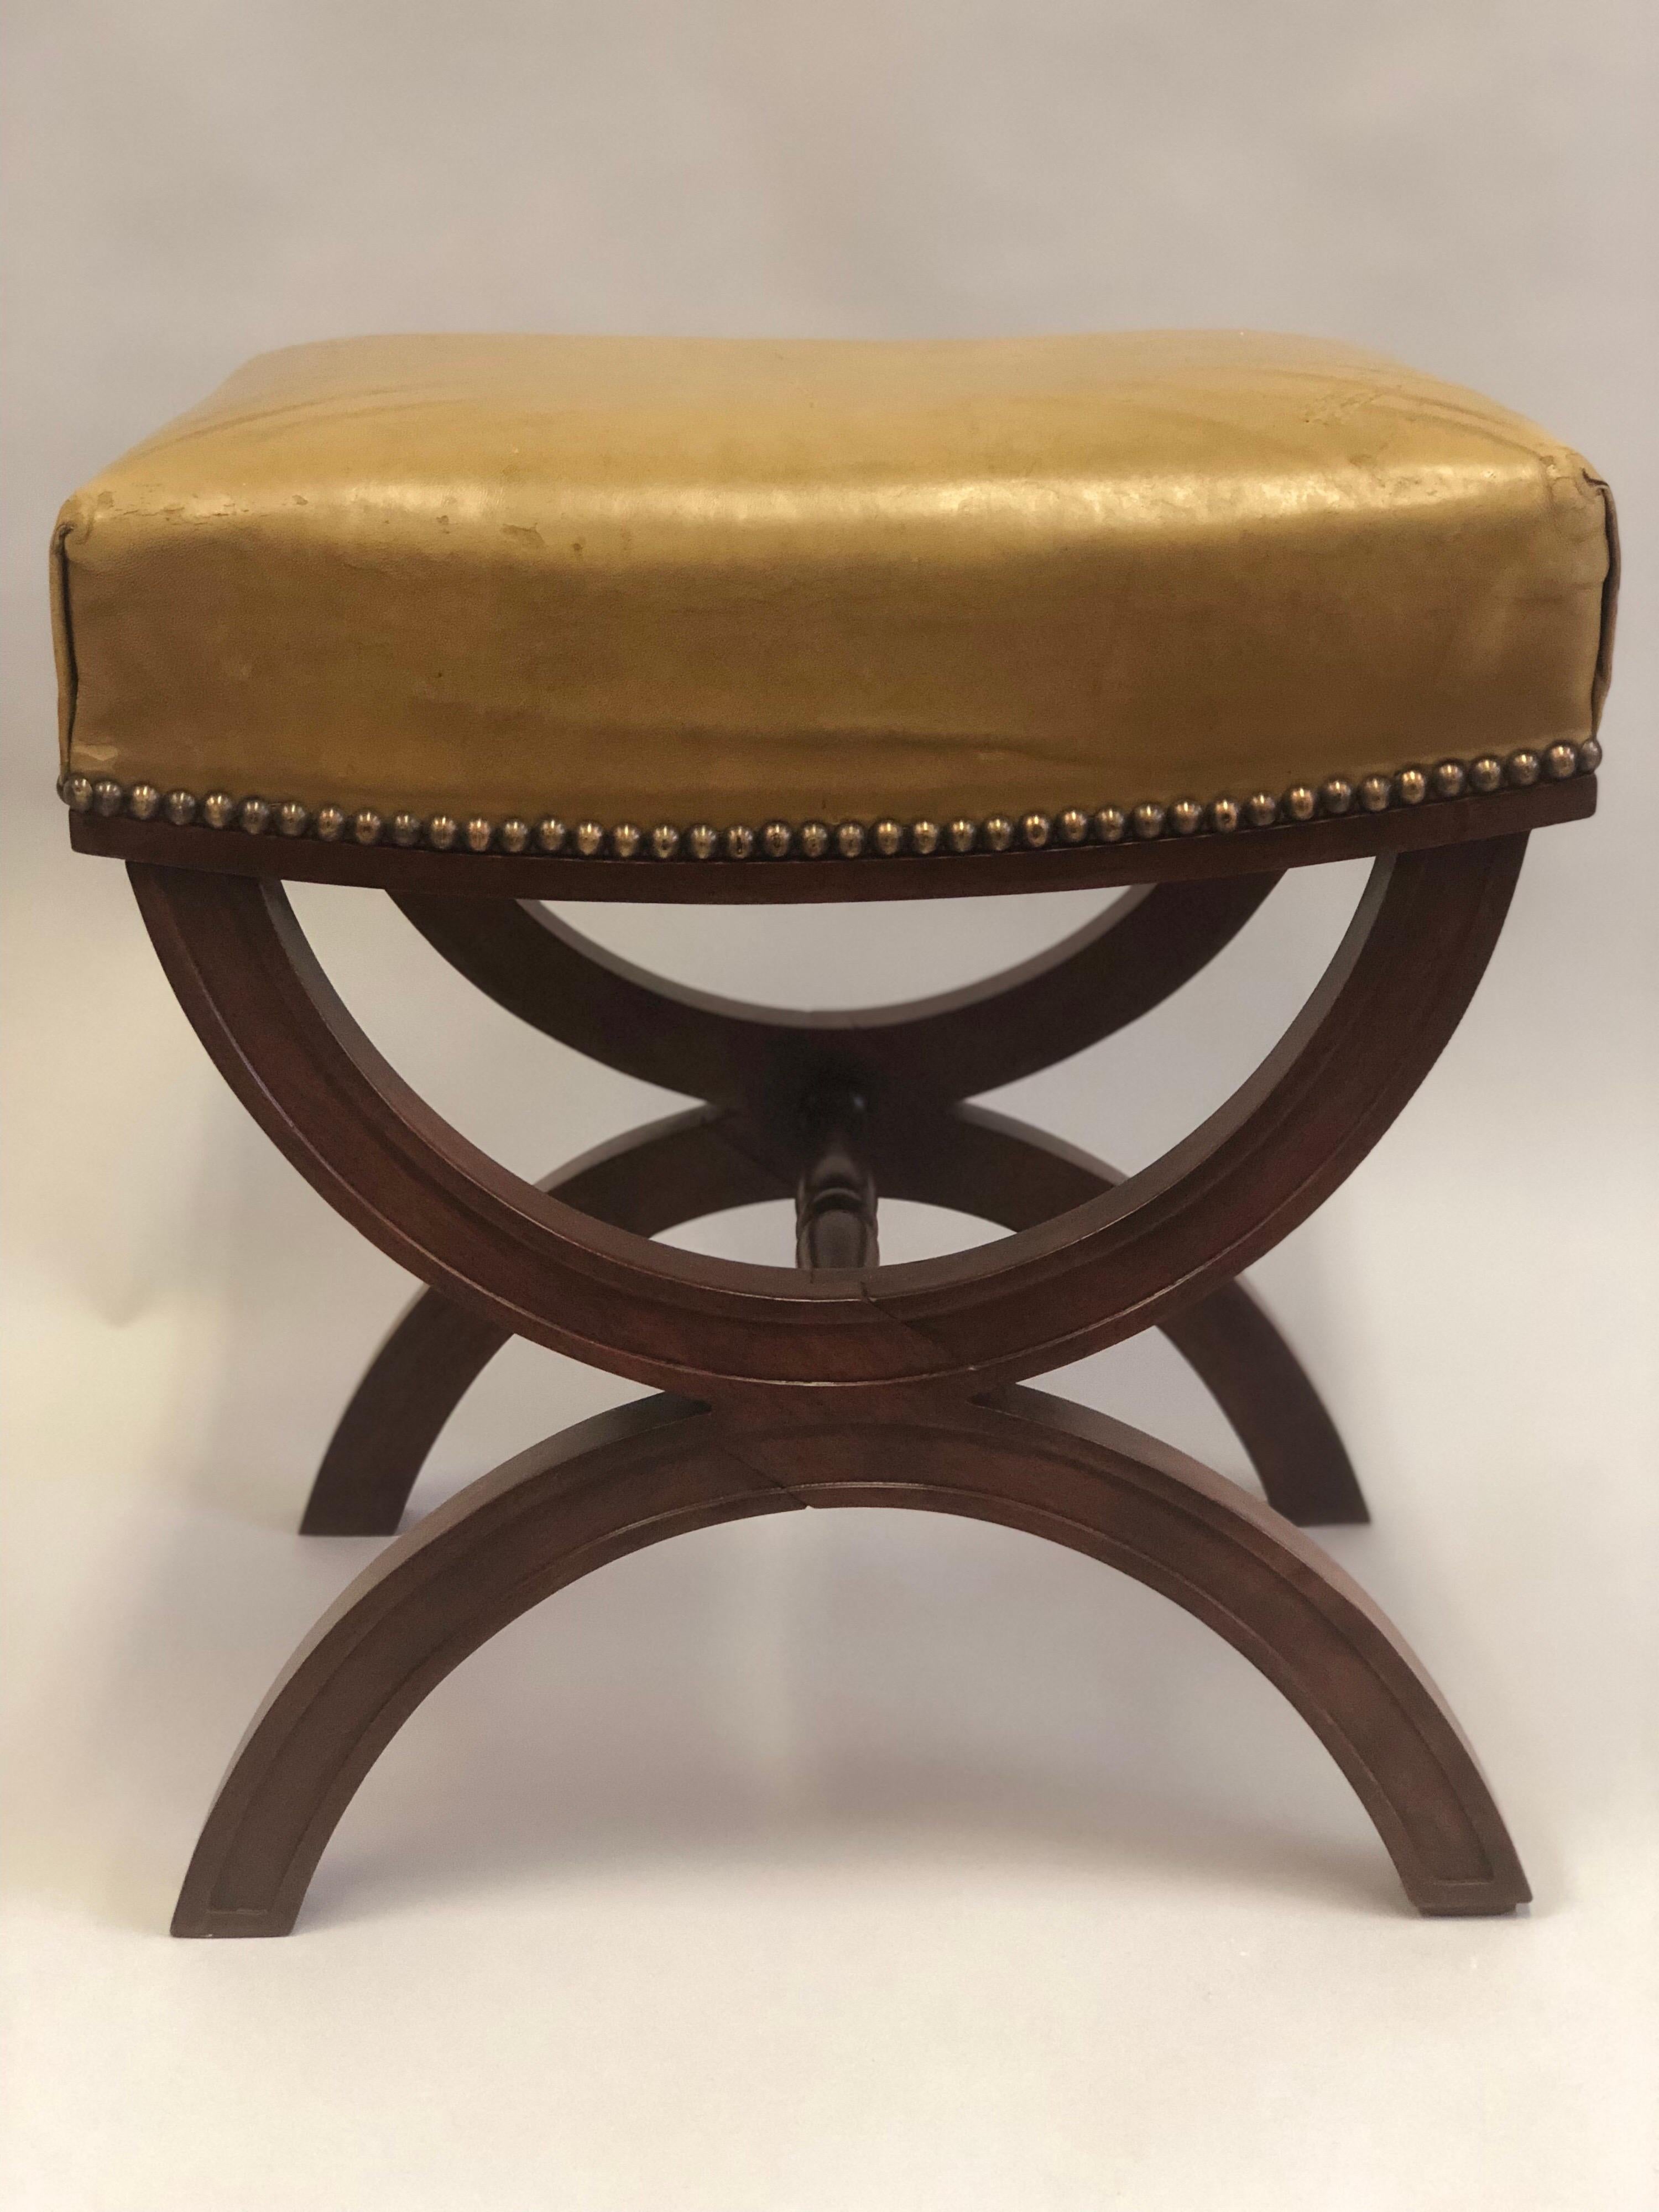 French Modern Neoclassical Mahogany & Leather Benches/ Stools, Andre Arbus, Pair For Sale 1